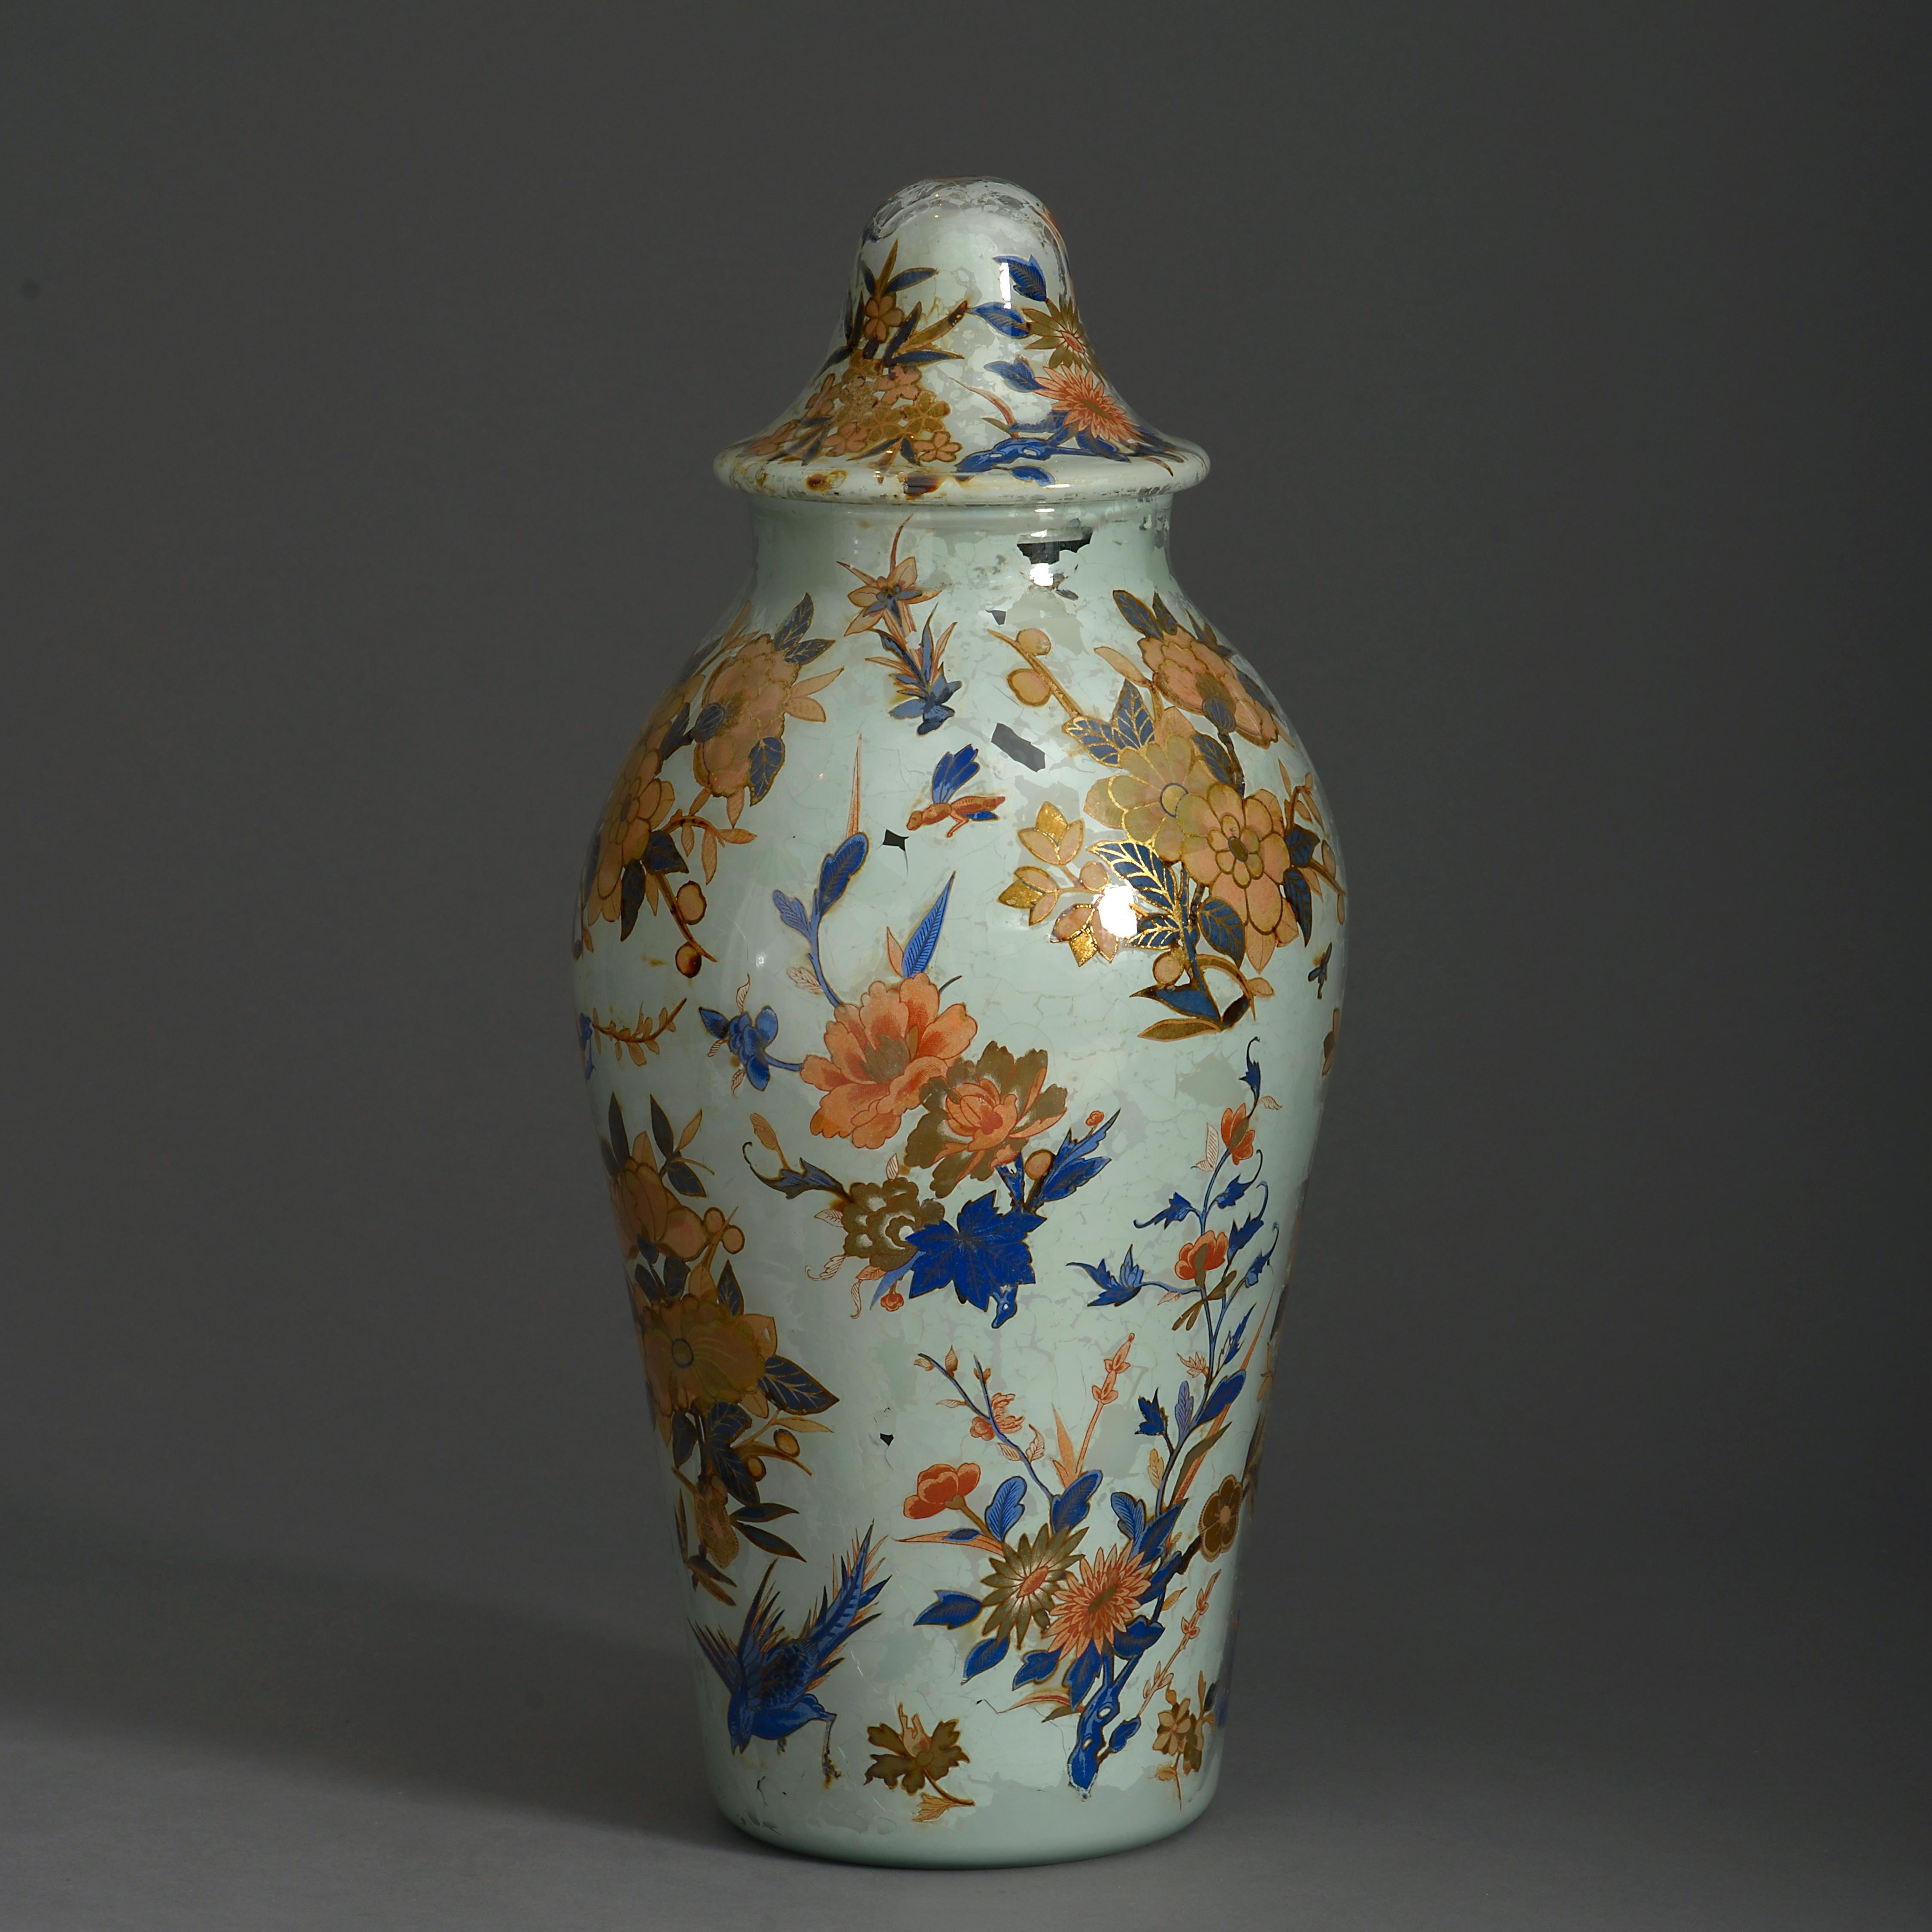 Chinese Export Mid-19th Century Lidded Decalcomania Vase